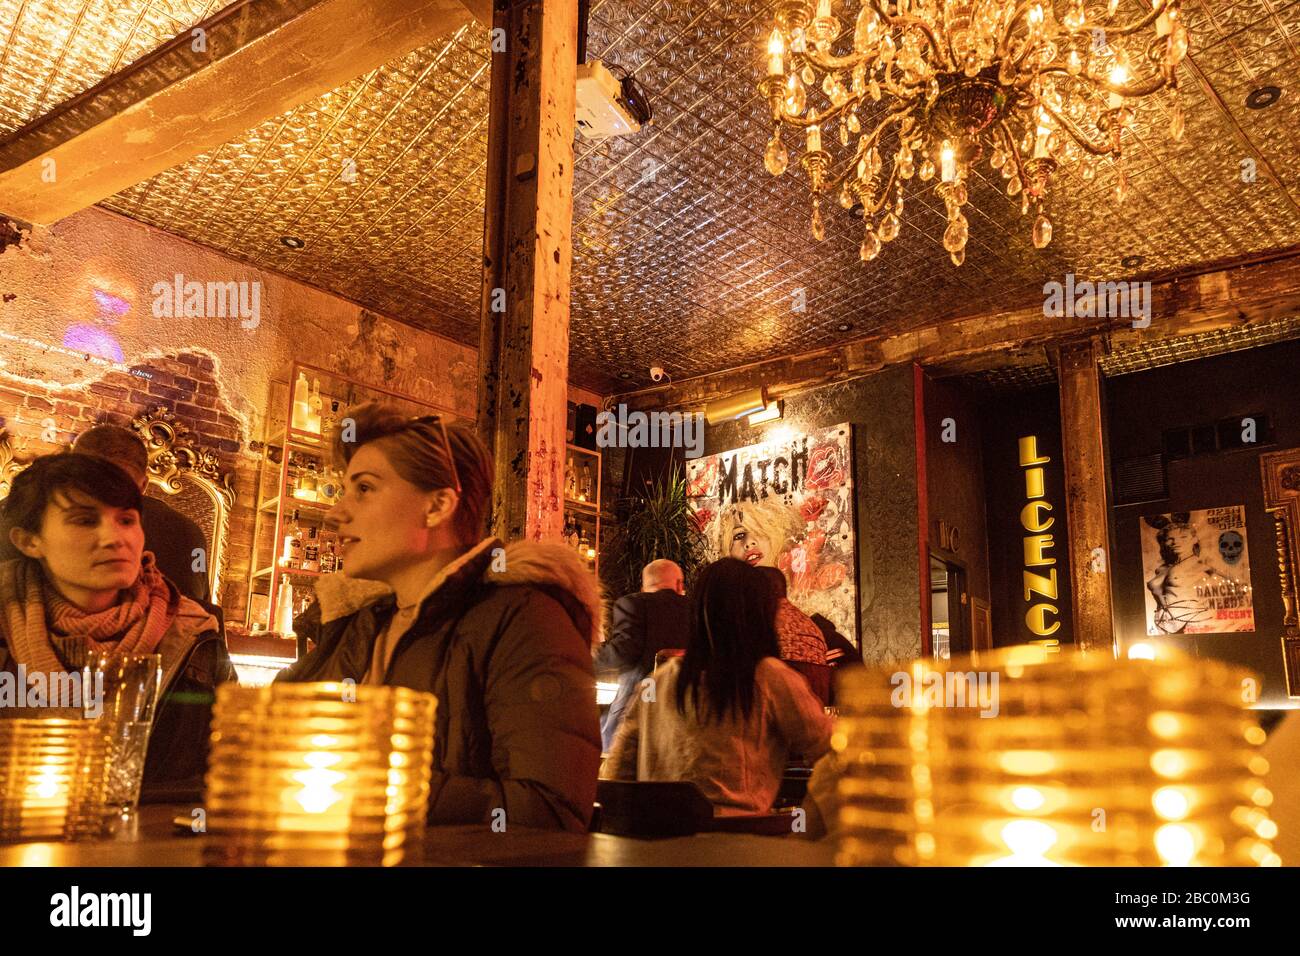 PUB AMBIANCE AT NIGHT, RUE SAINT-PAUL, MONTREAL, QUEBEC, CANADA Stock Photo